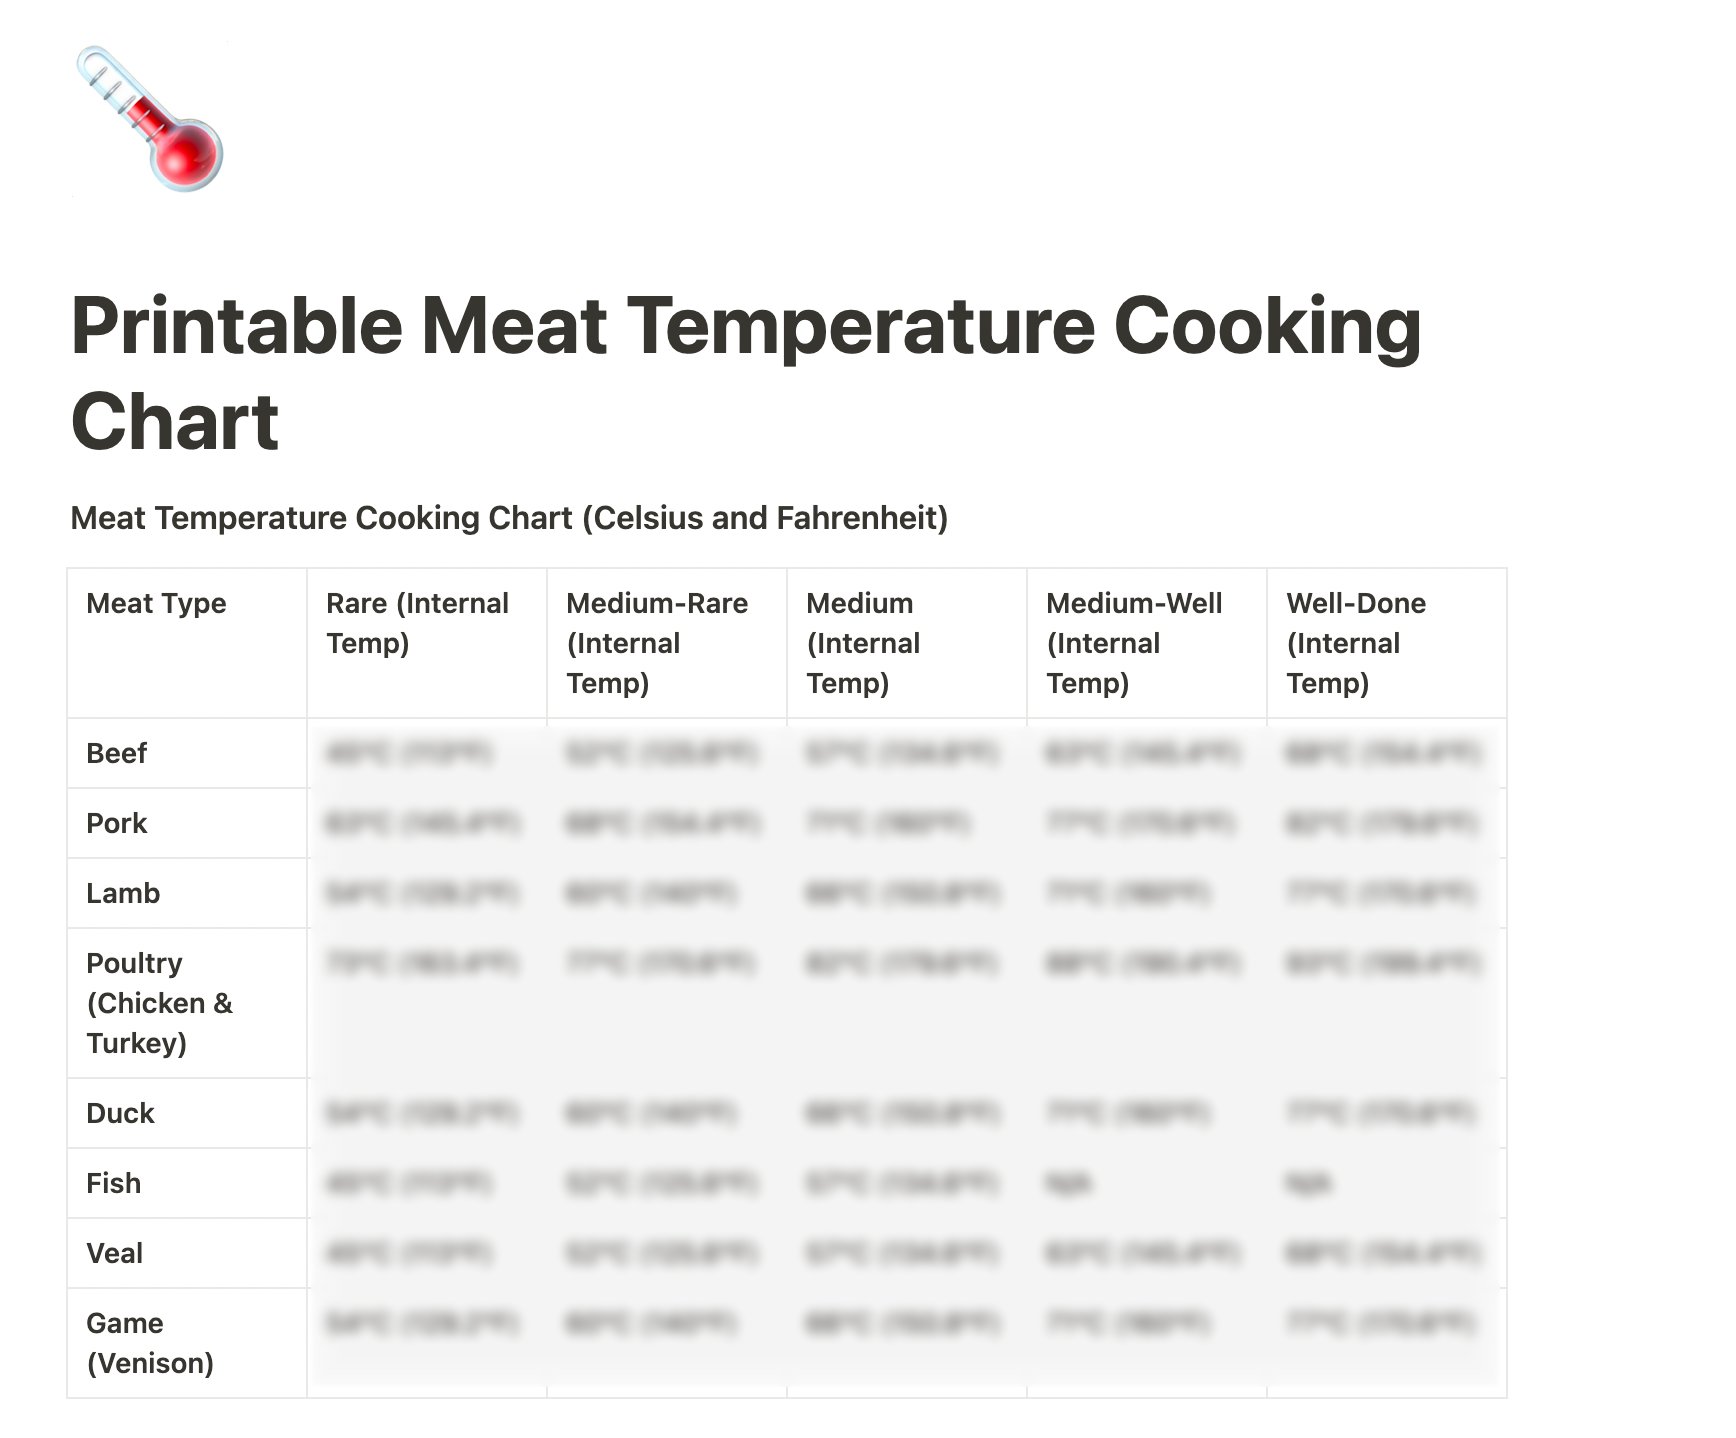 Mike Salguero on X: Cooking your meat at the right temperature is